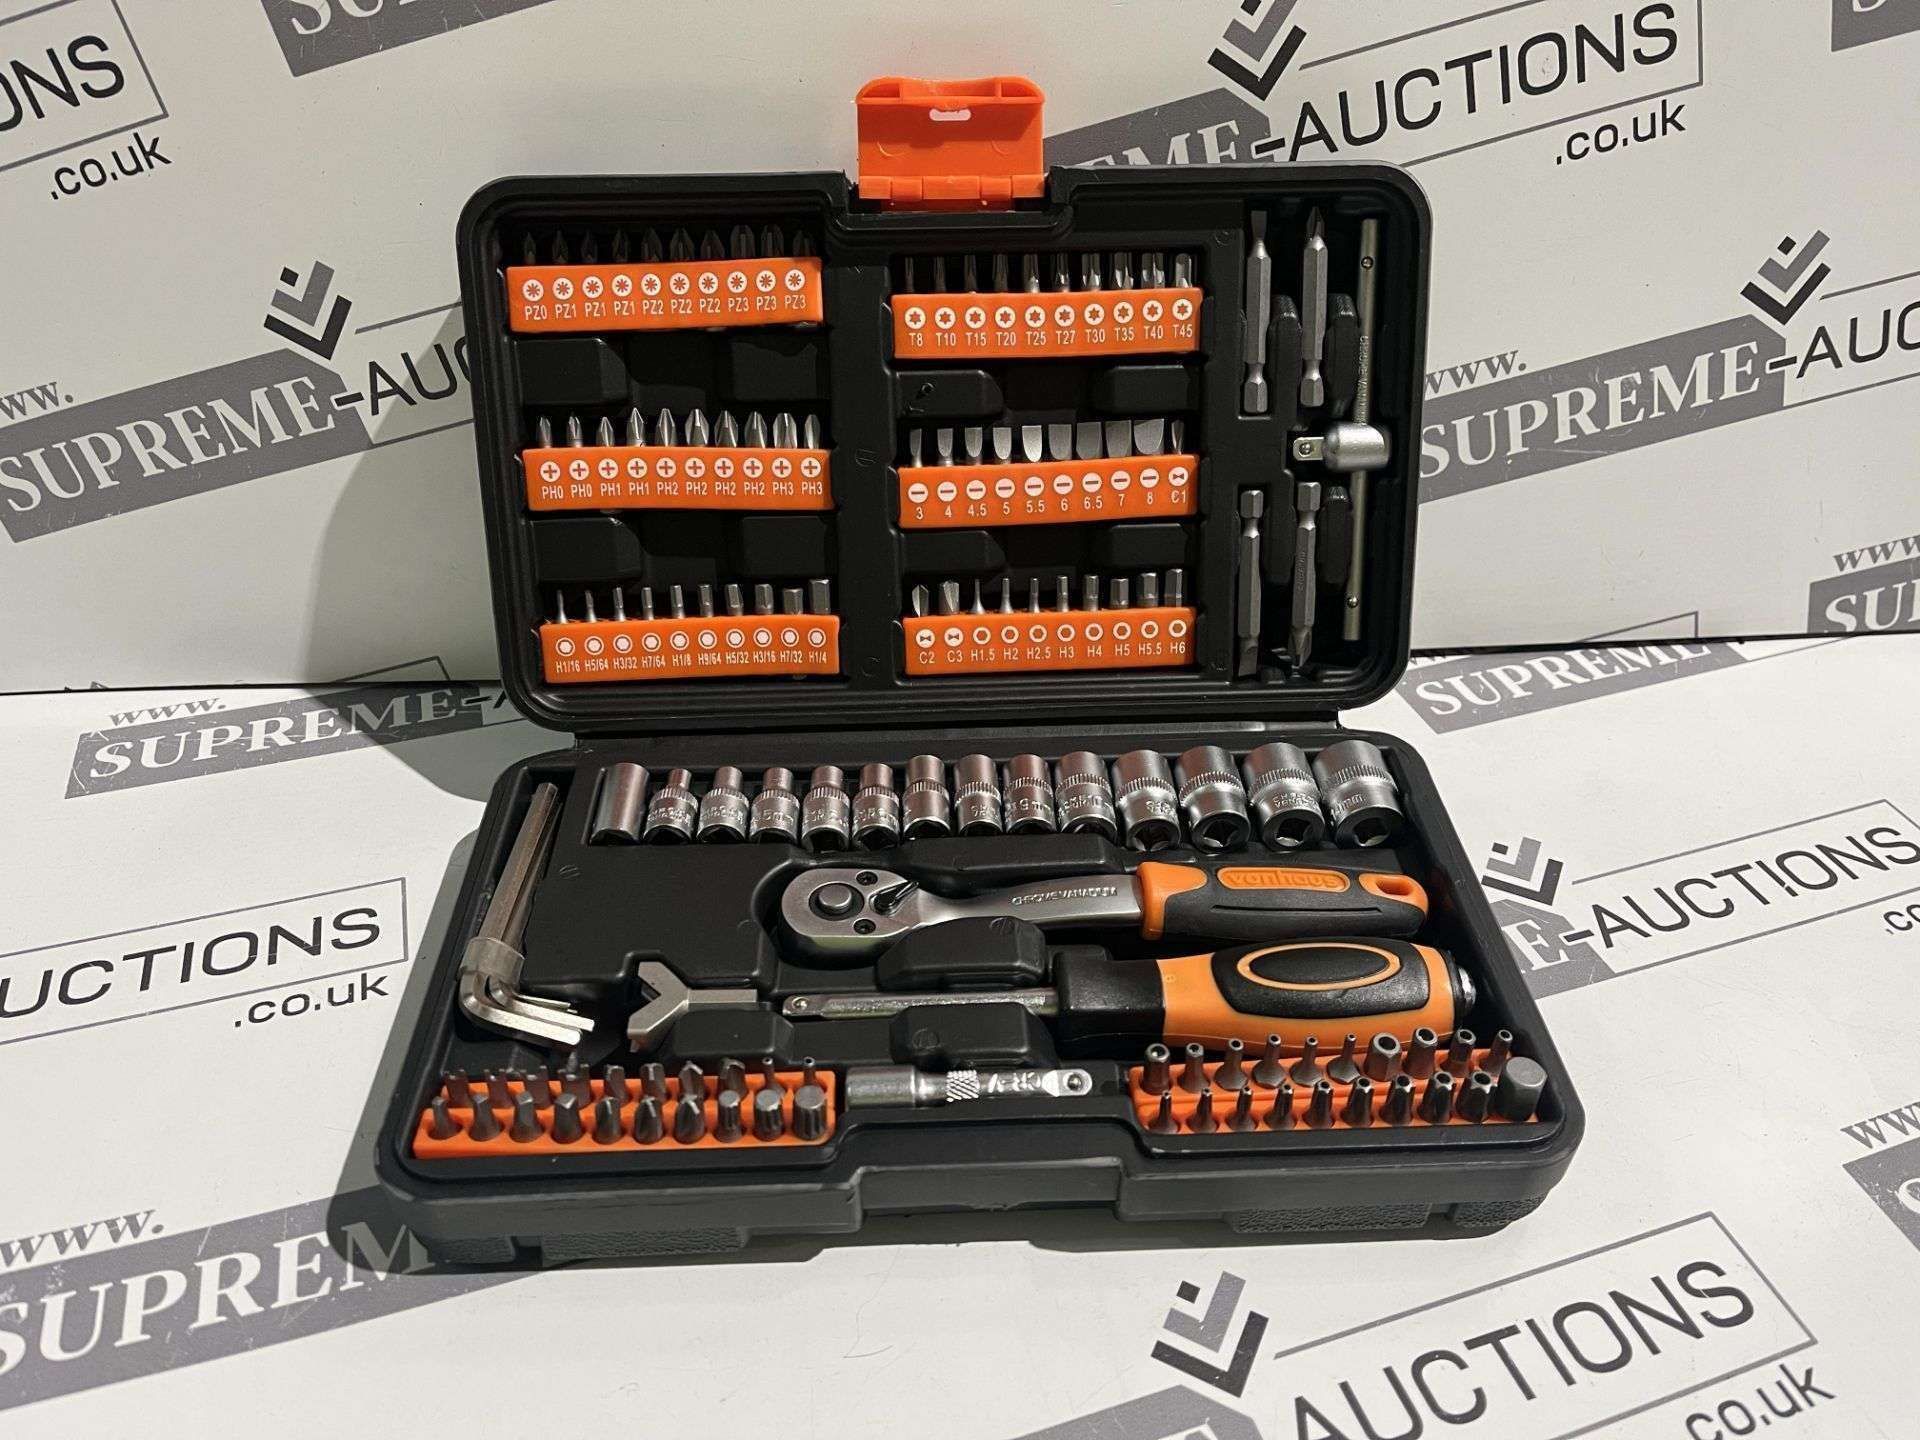 2x BRAND NEW 130 PIECE SOCKET & BIT TOOL SETS. (R18.10). Be prepared for the unexpected with the